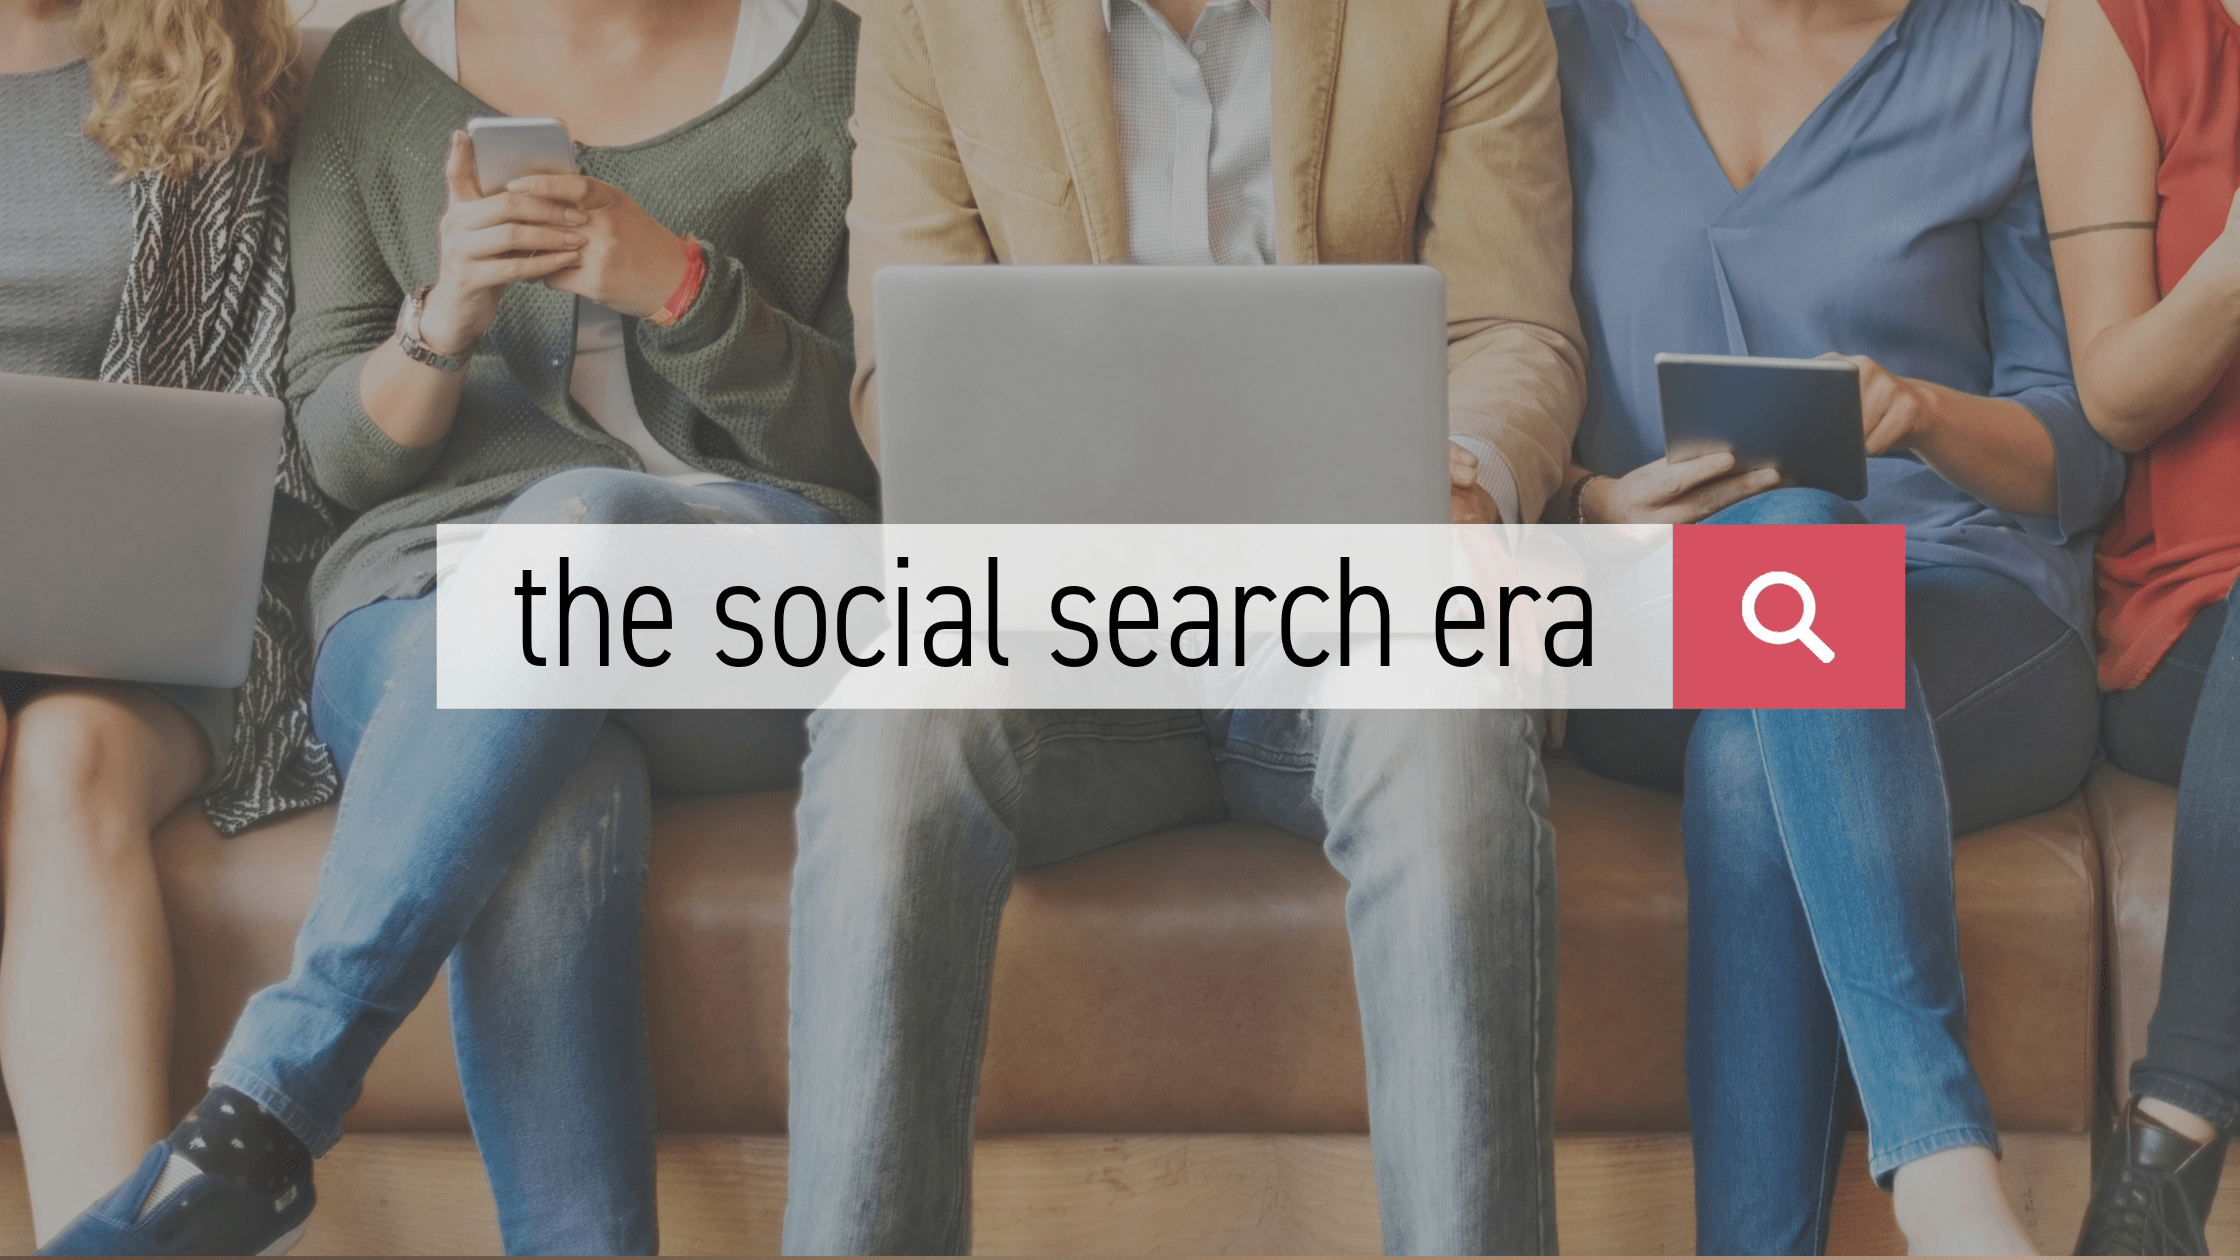 Image of five people on a couch scrolling on various devices with the words "the social search era" on top in a search bar